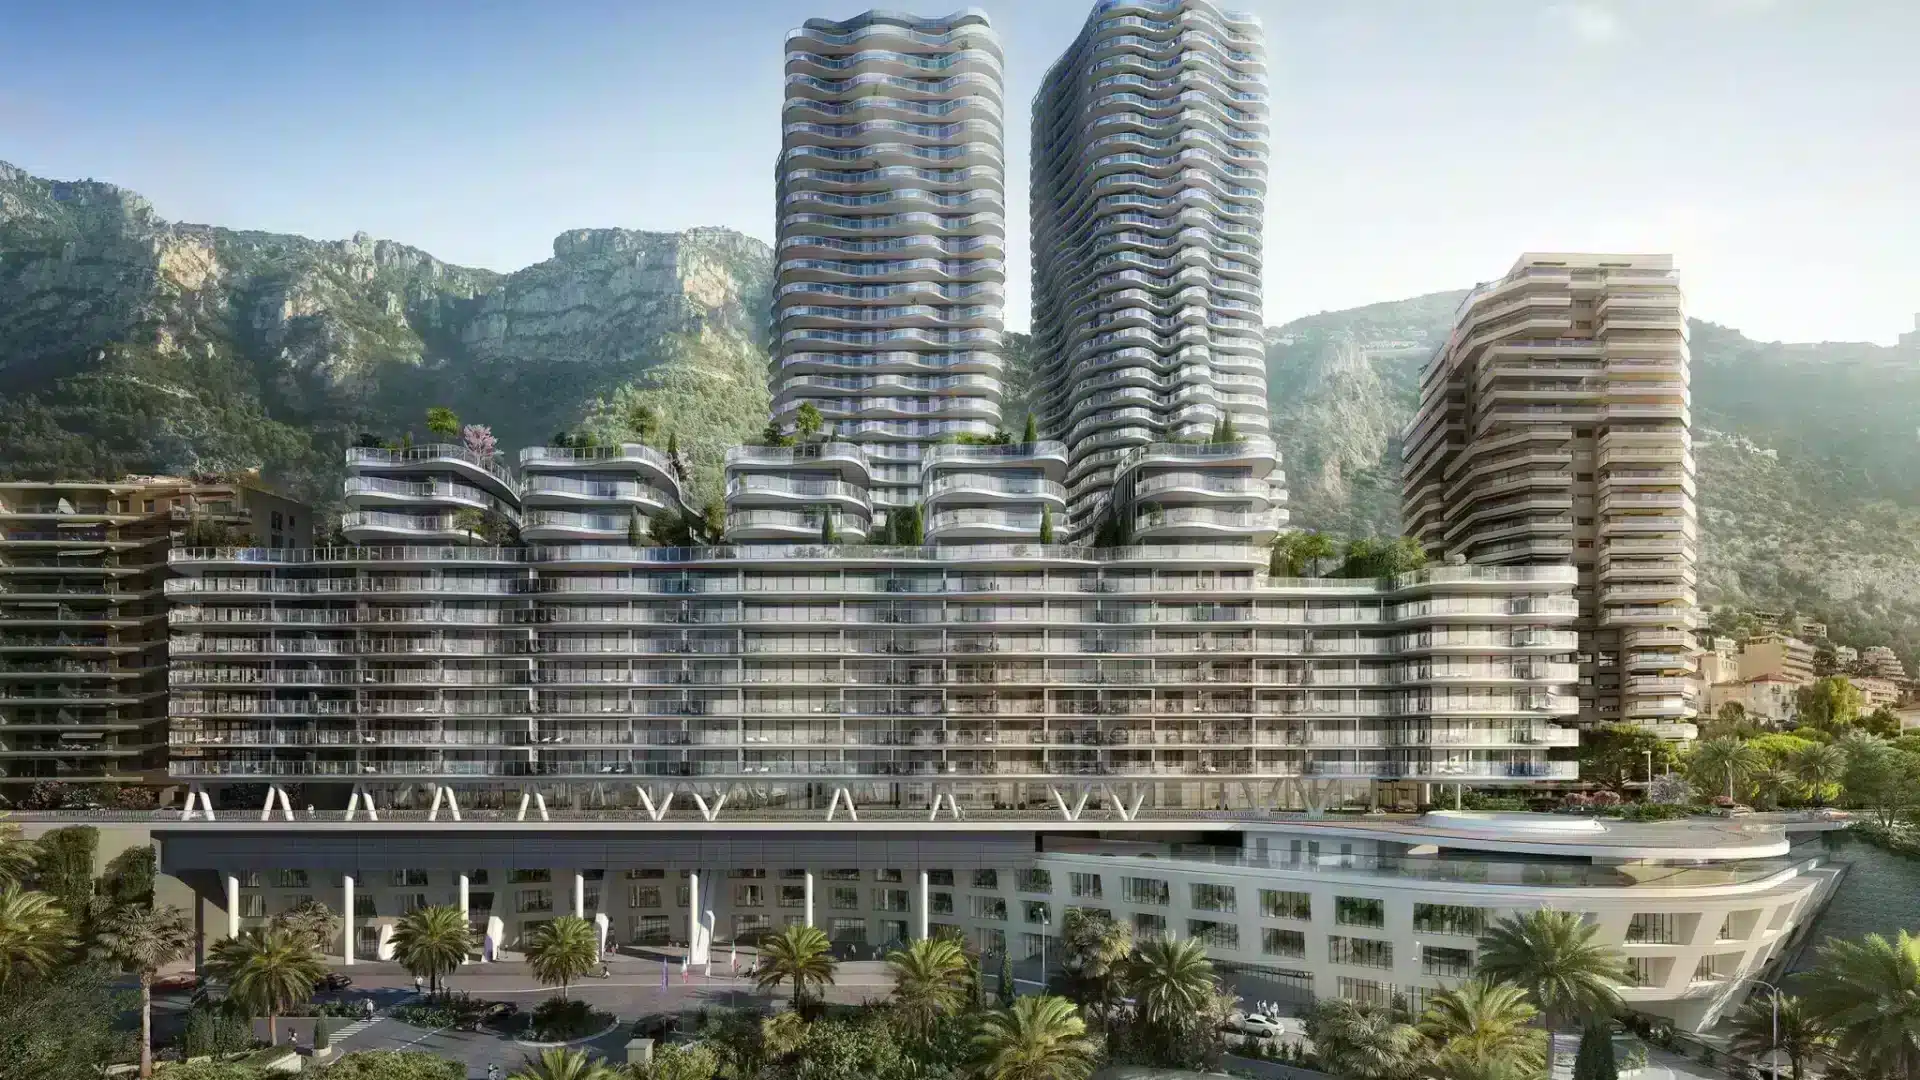 This is a photo of the entire development by Marzocco Group. You have the two towers of Testimonio II, the 5 villas and apartment building of Bay House below, and at the lowest level you have the International School of Monaco